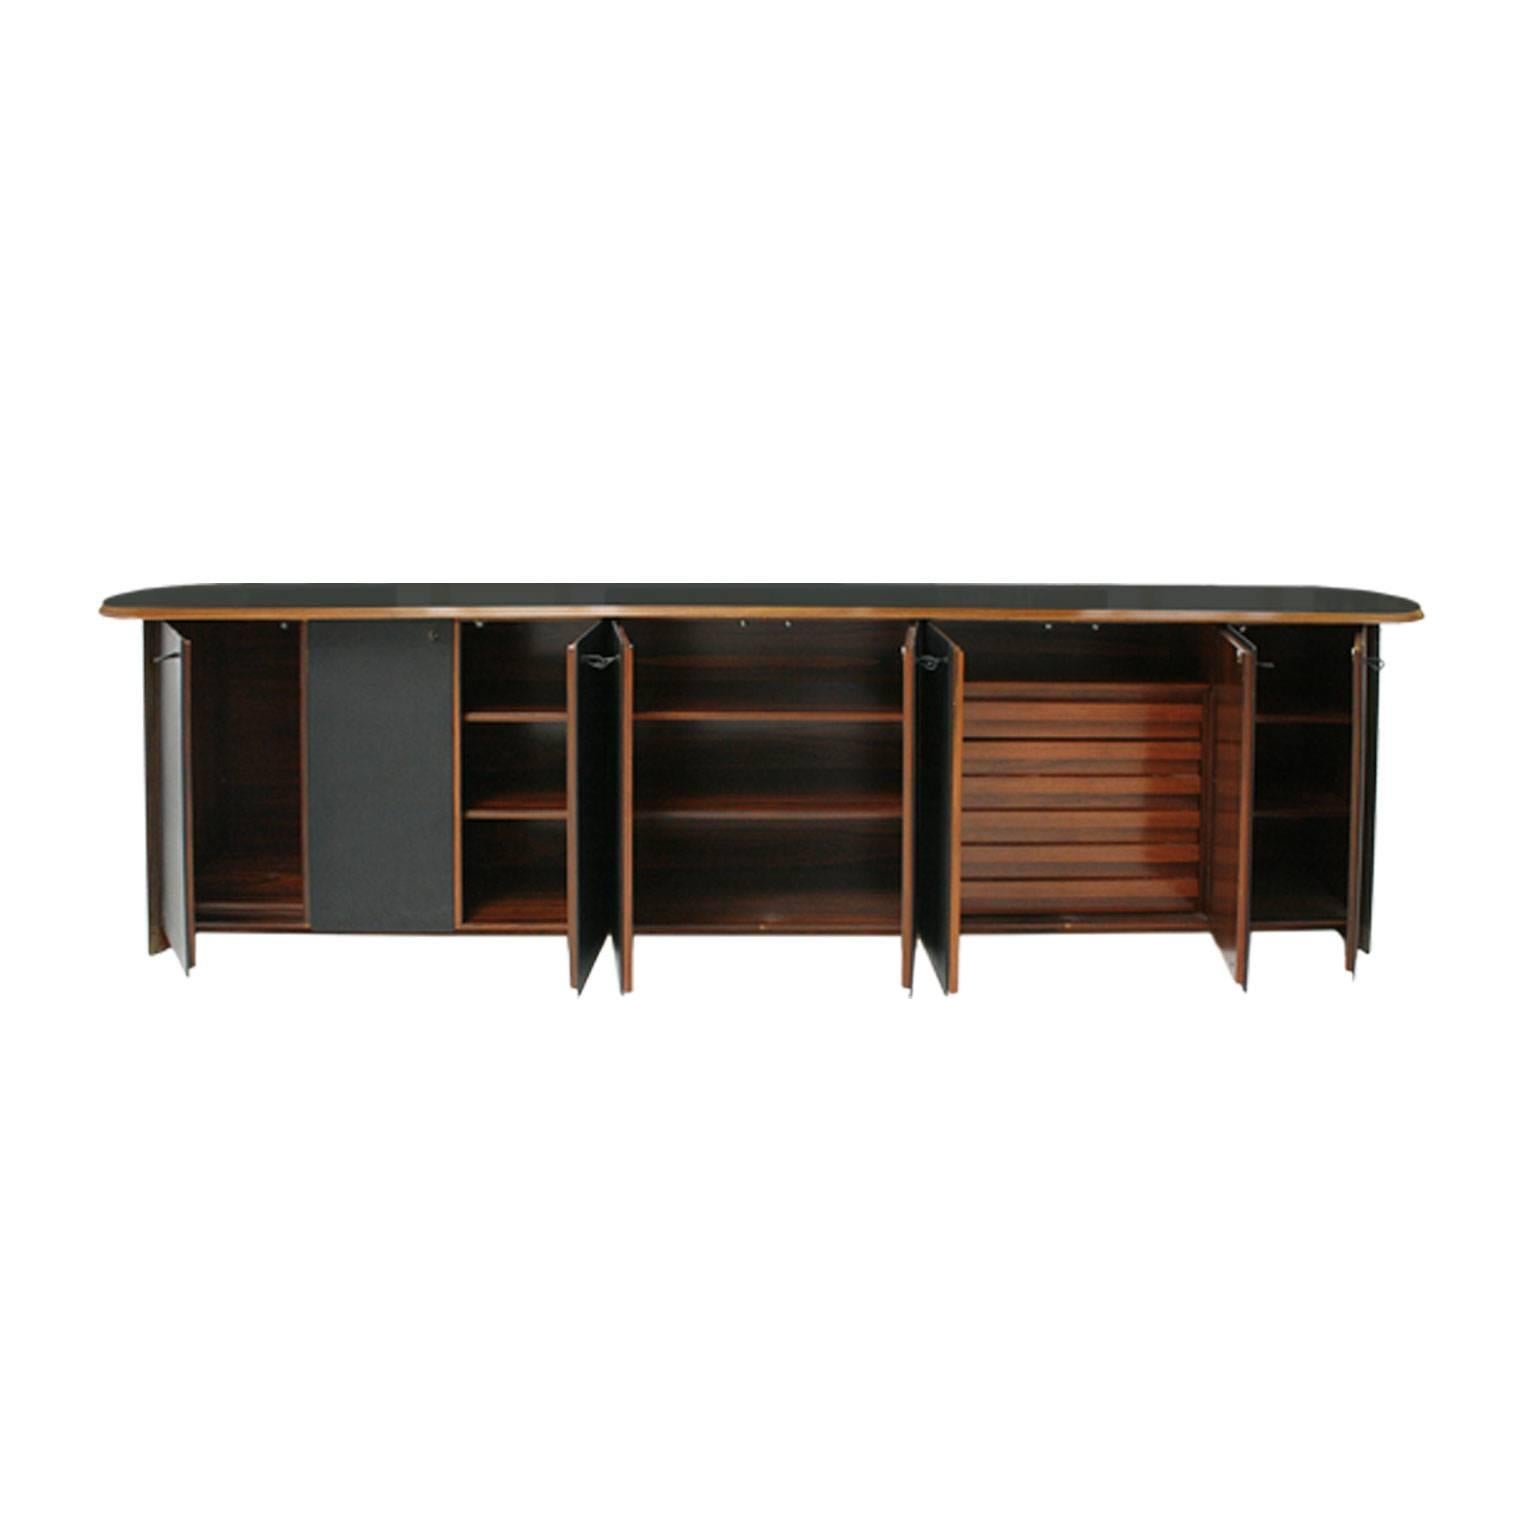 Sideboard designed by Afra and Tobia Scarpa belonging to the series 